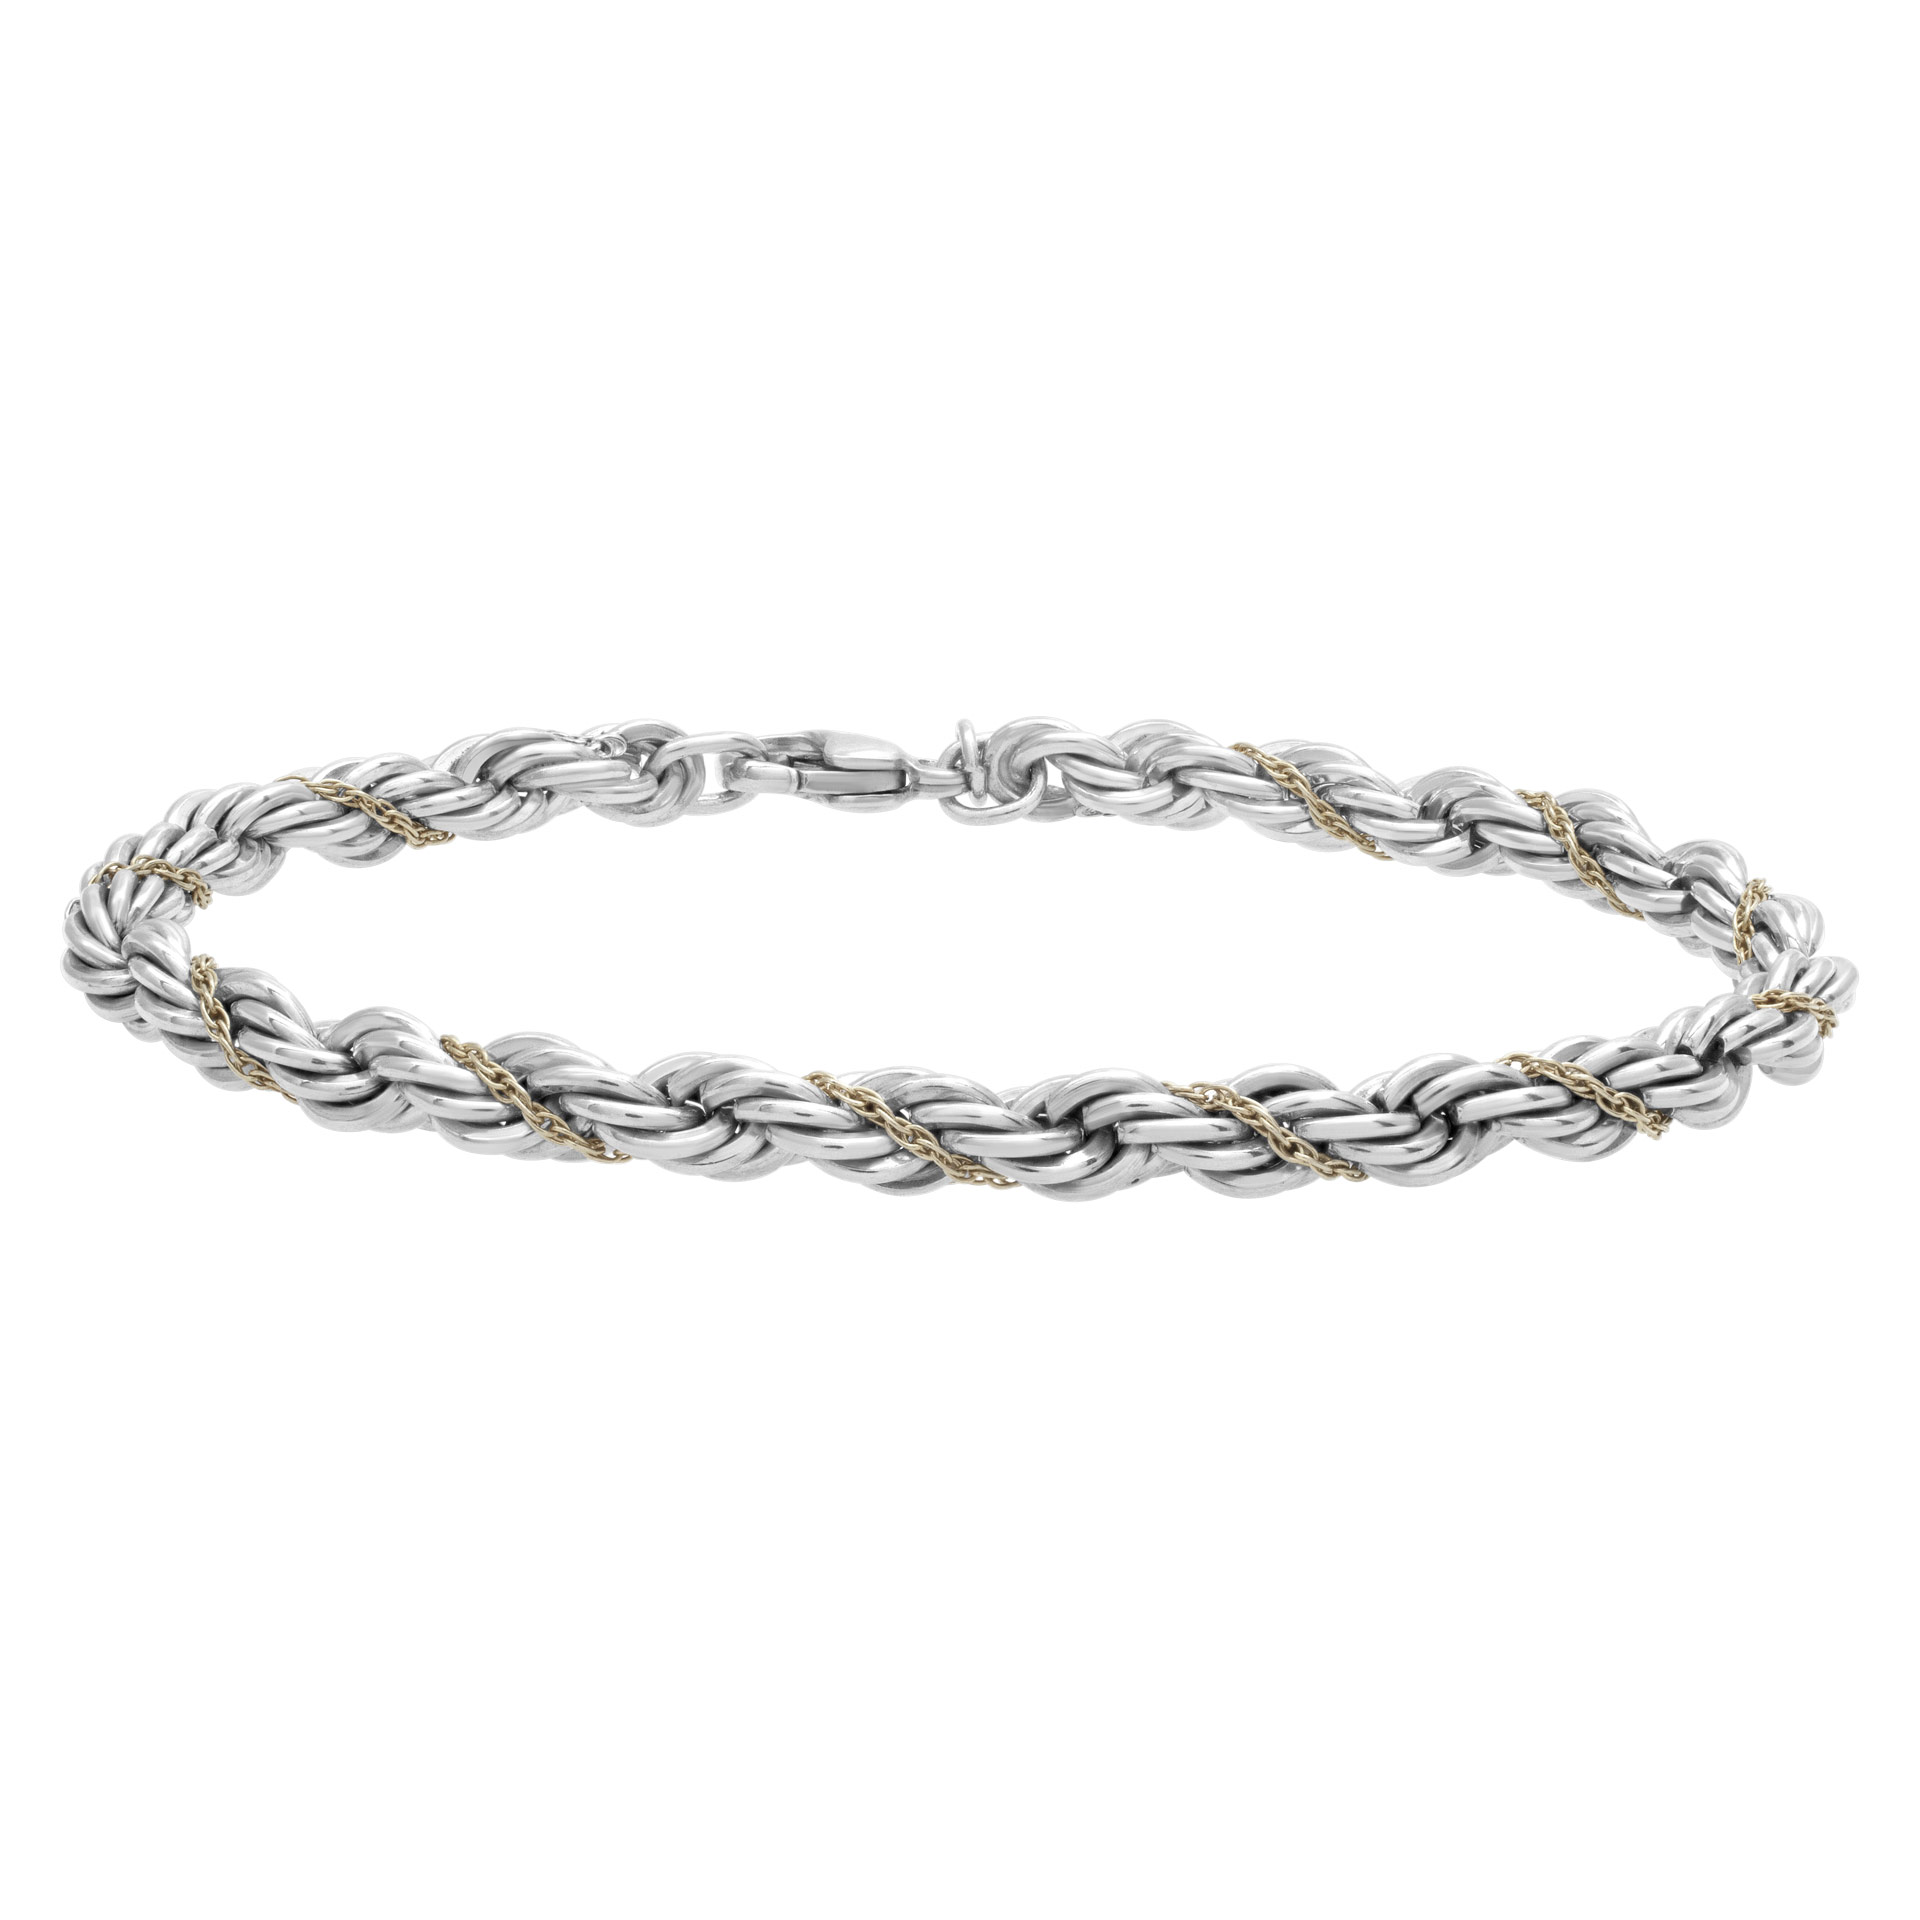 Tiffany & Co. twisted rope bracelet in 18k & sterling silver image 1